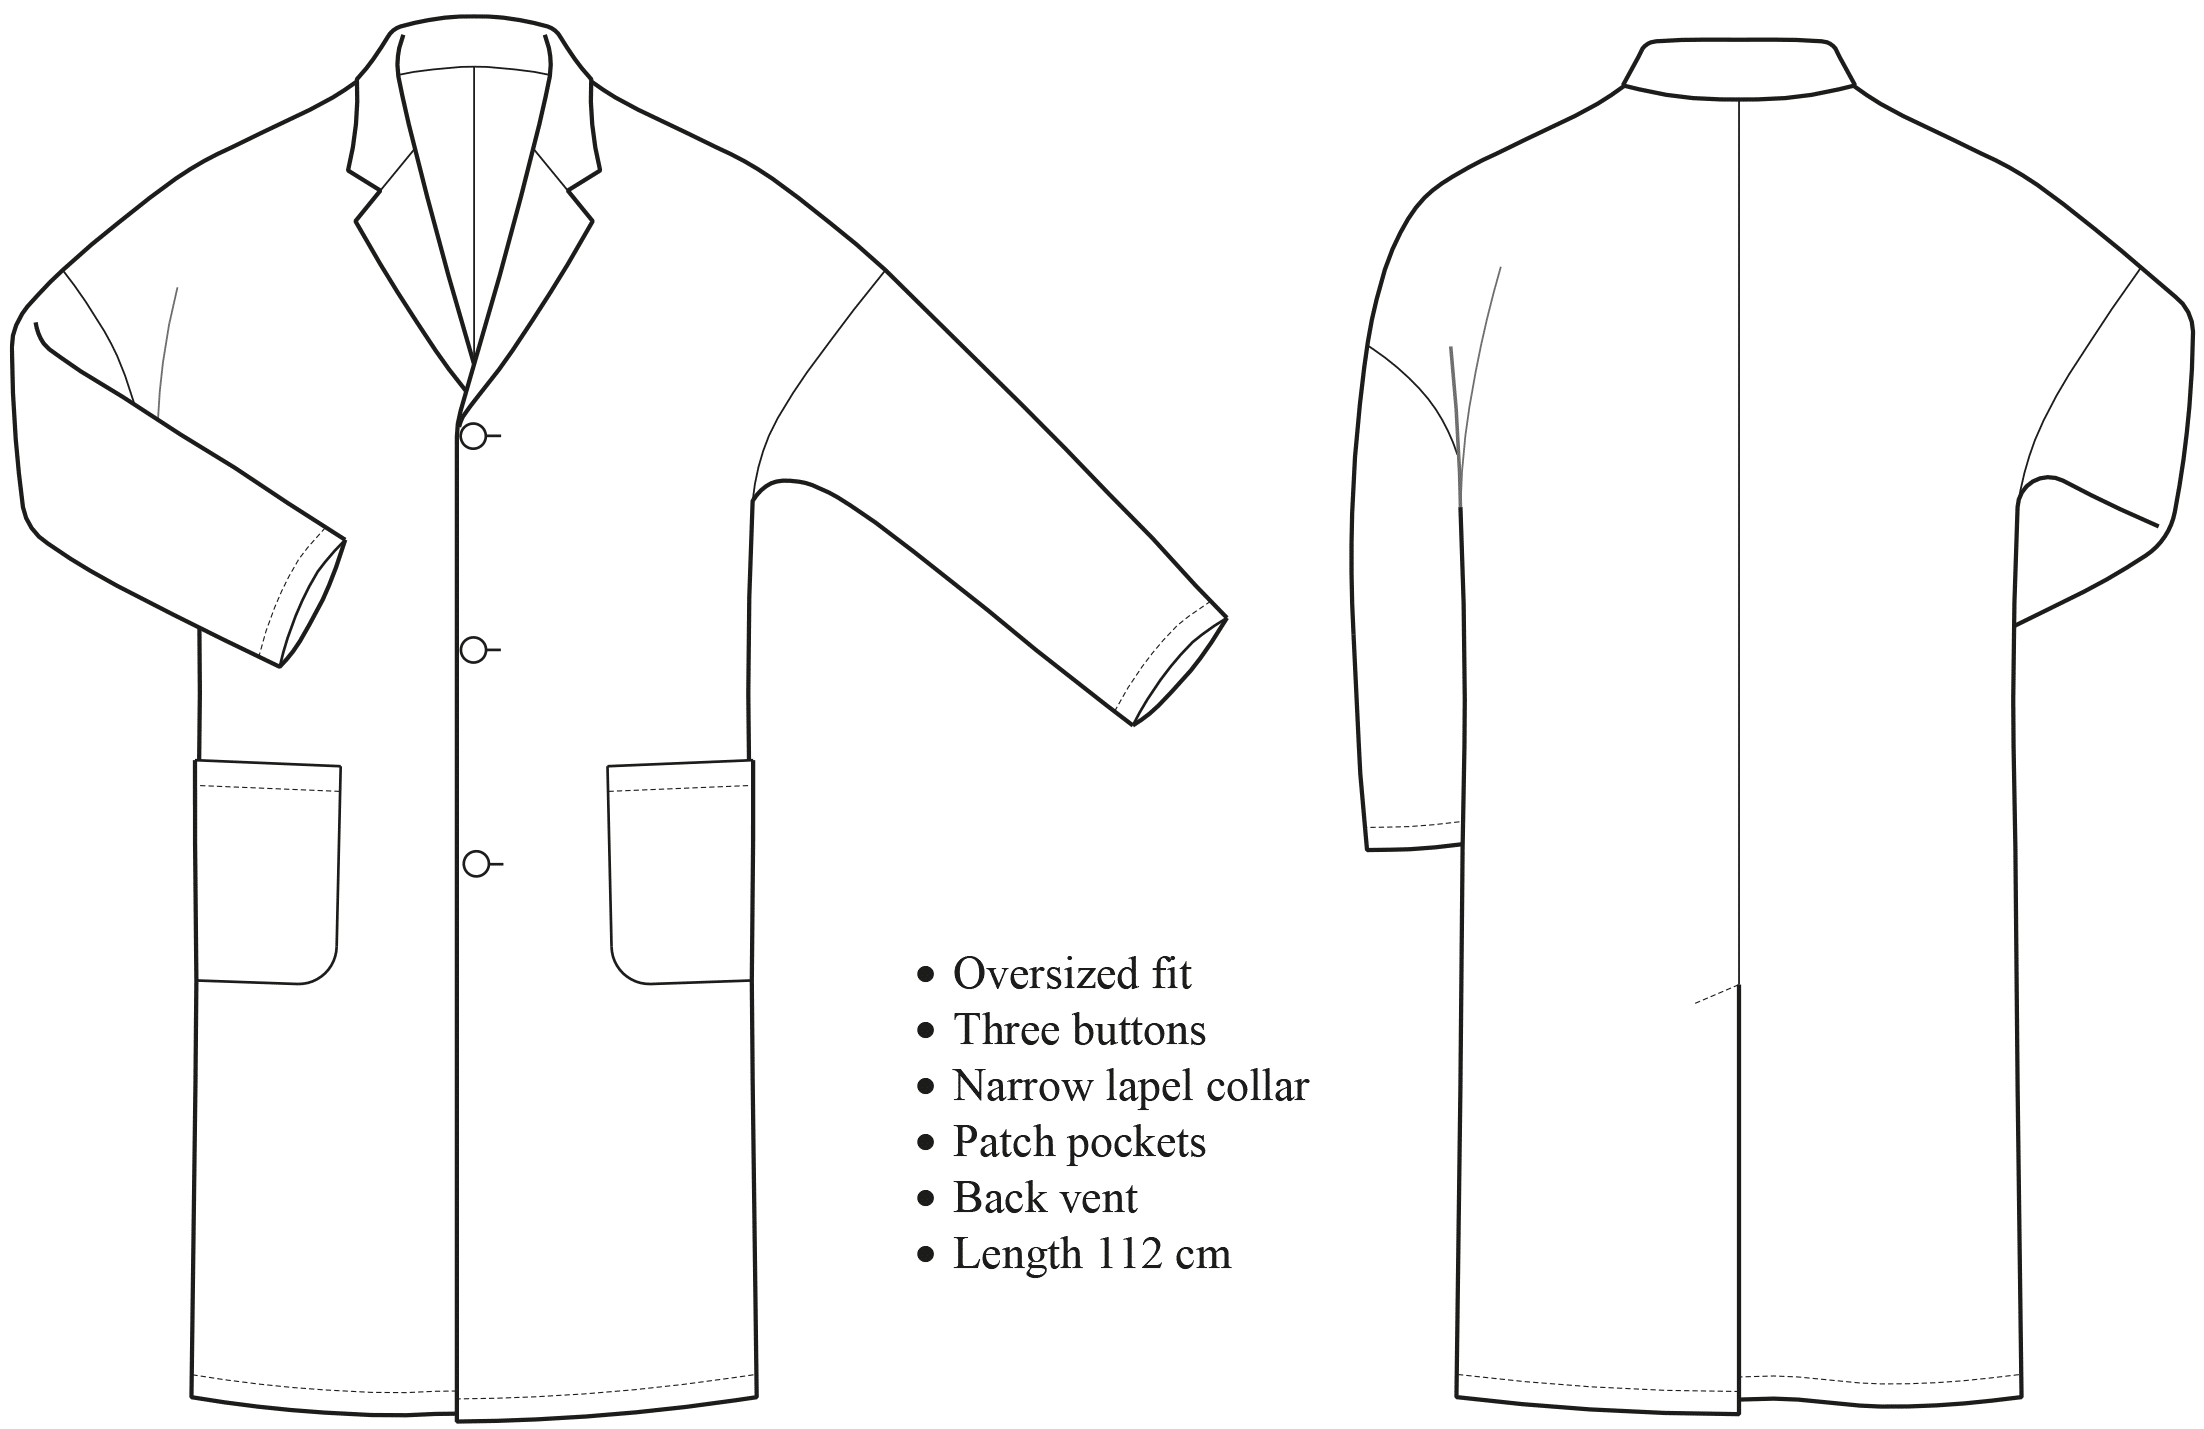 You see the technical drawing of a coat for the pattern construction.